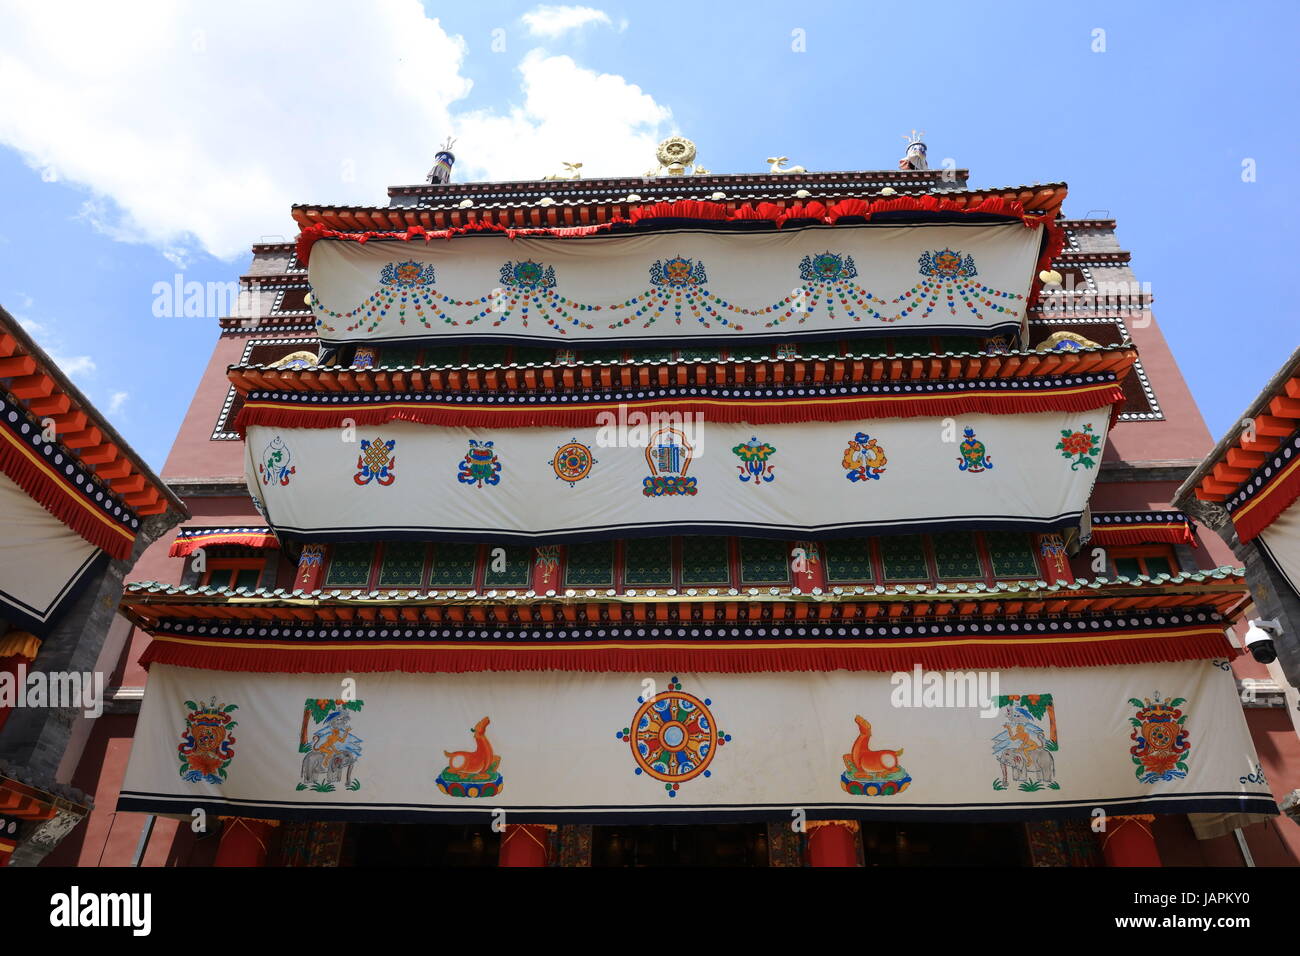 June 7, 2017 - Xining, Xining, China - Xining, CHINA-June 7 2017: (EDITORIAL USE ONLY. CHINA OUT) ..The Tar Monastery, one of the six most important monasteries of the Gelukpa (Yellow Hat) school of Tibetan Buddhism, is a large complex featuring dozens of halls and towers on a mountainside in both Tibetan and Han architectural styles. Located in Huangzhong County, 25 kilometers from Xining, northwest China's Qinghai Province, the monastery was built in 1560 in honor of the founder of Gelukpa School, Tsongkhapa. It's known for its many butter sculptures, mural paintings and barbolas which fully Stock Photo